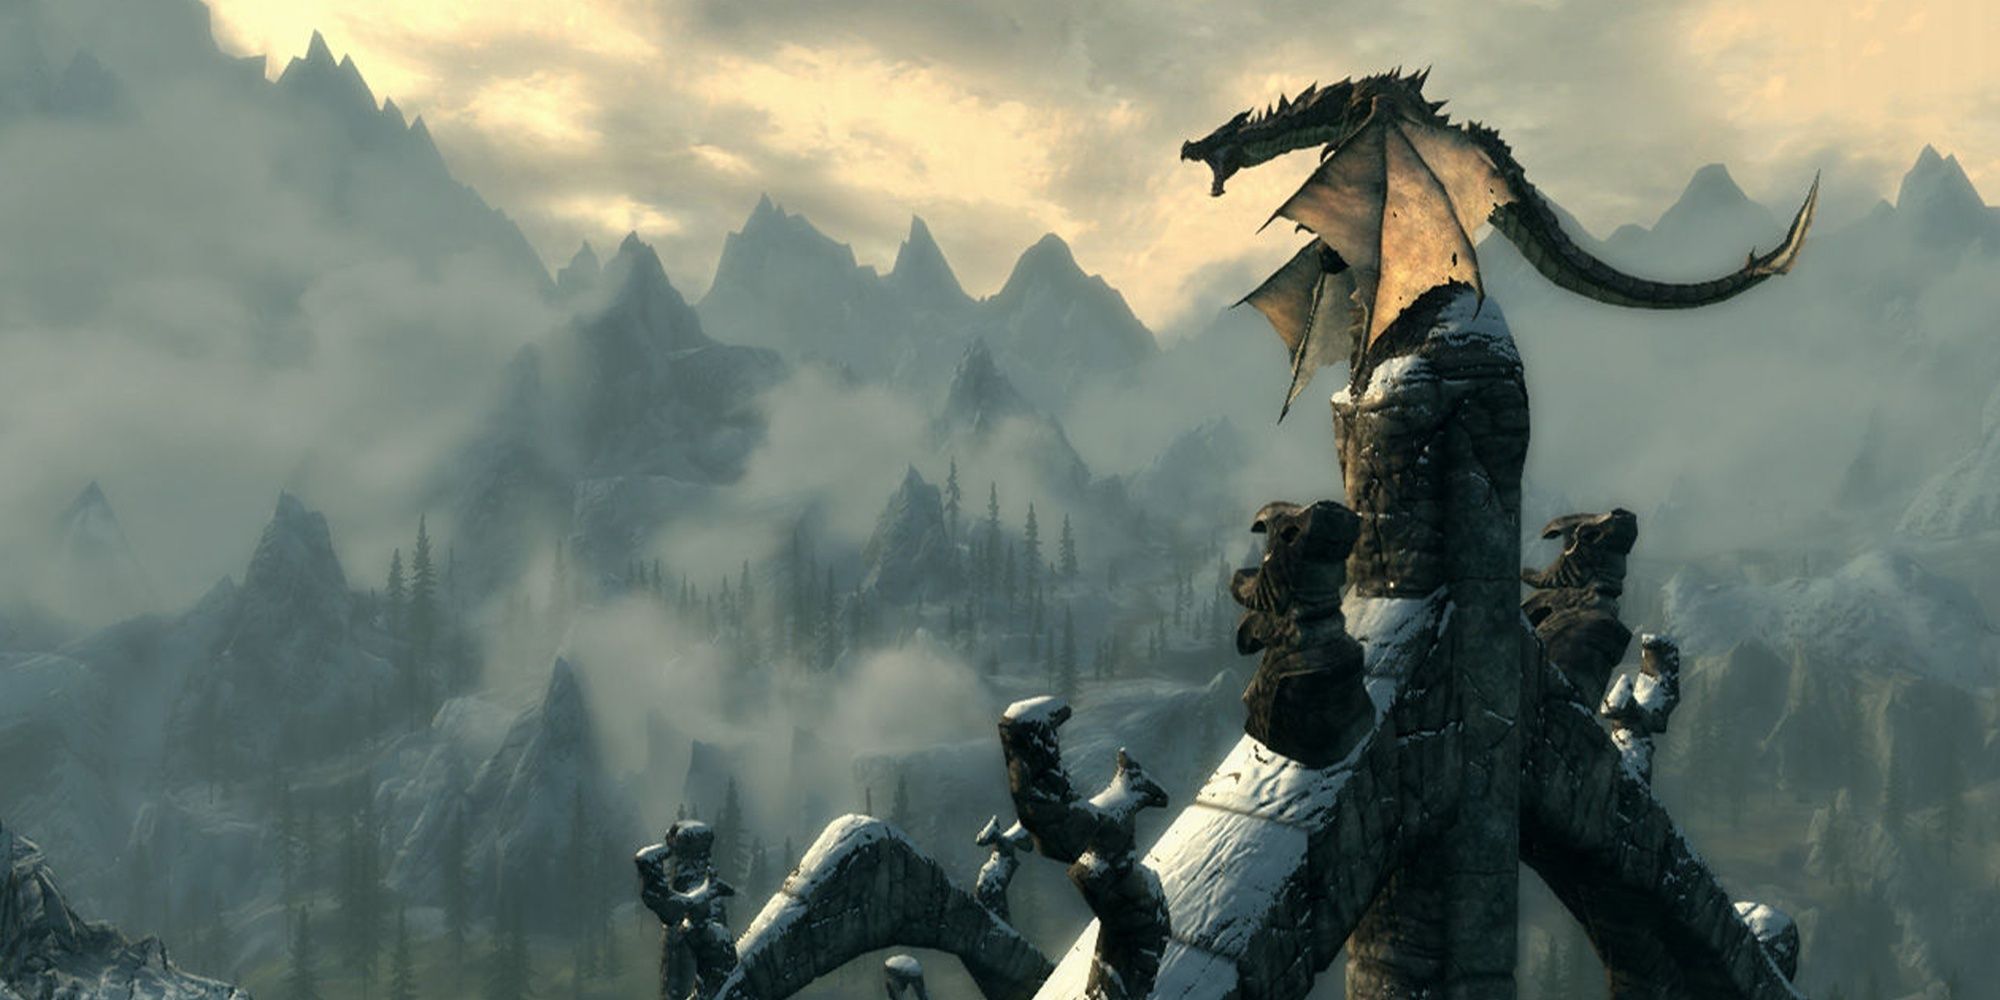 Skyrim Is Still The Undisputed King Of RPG Discovery